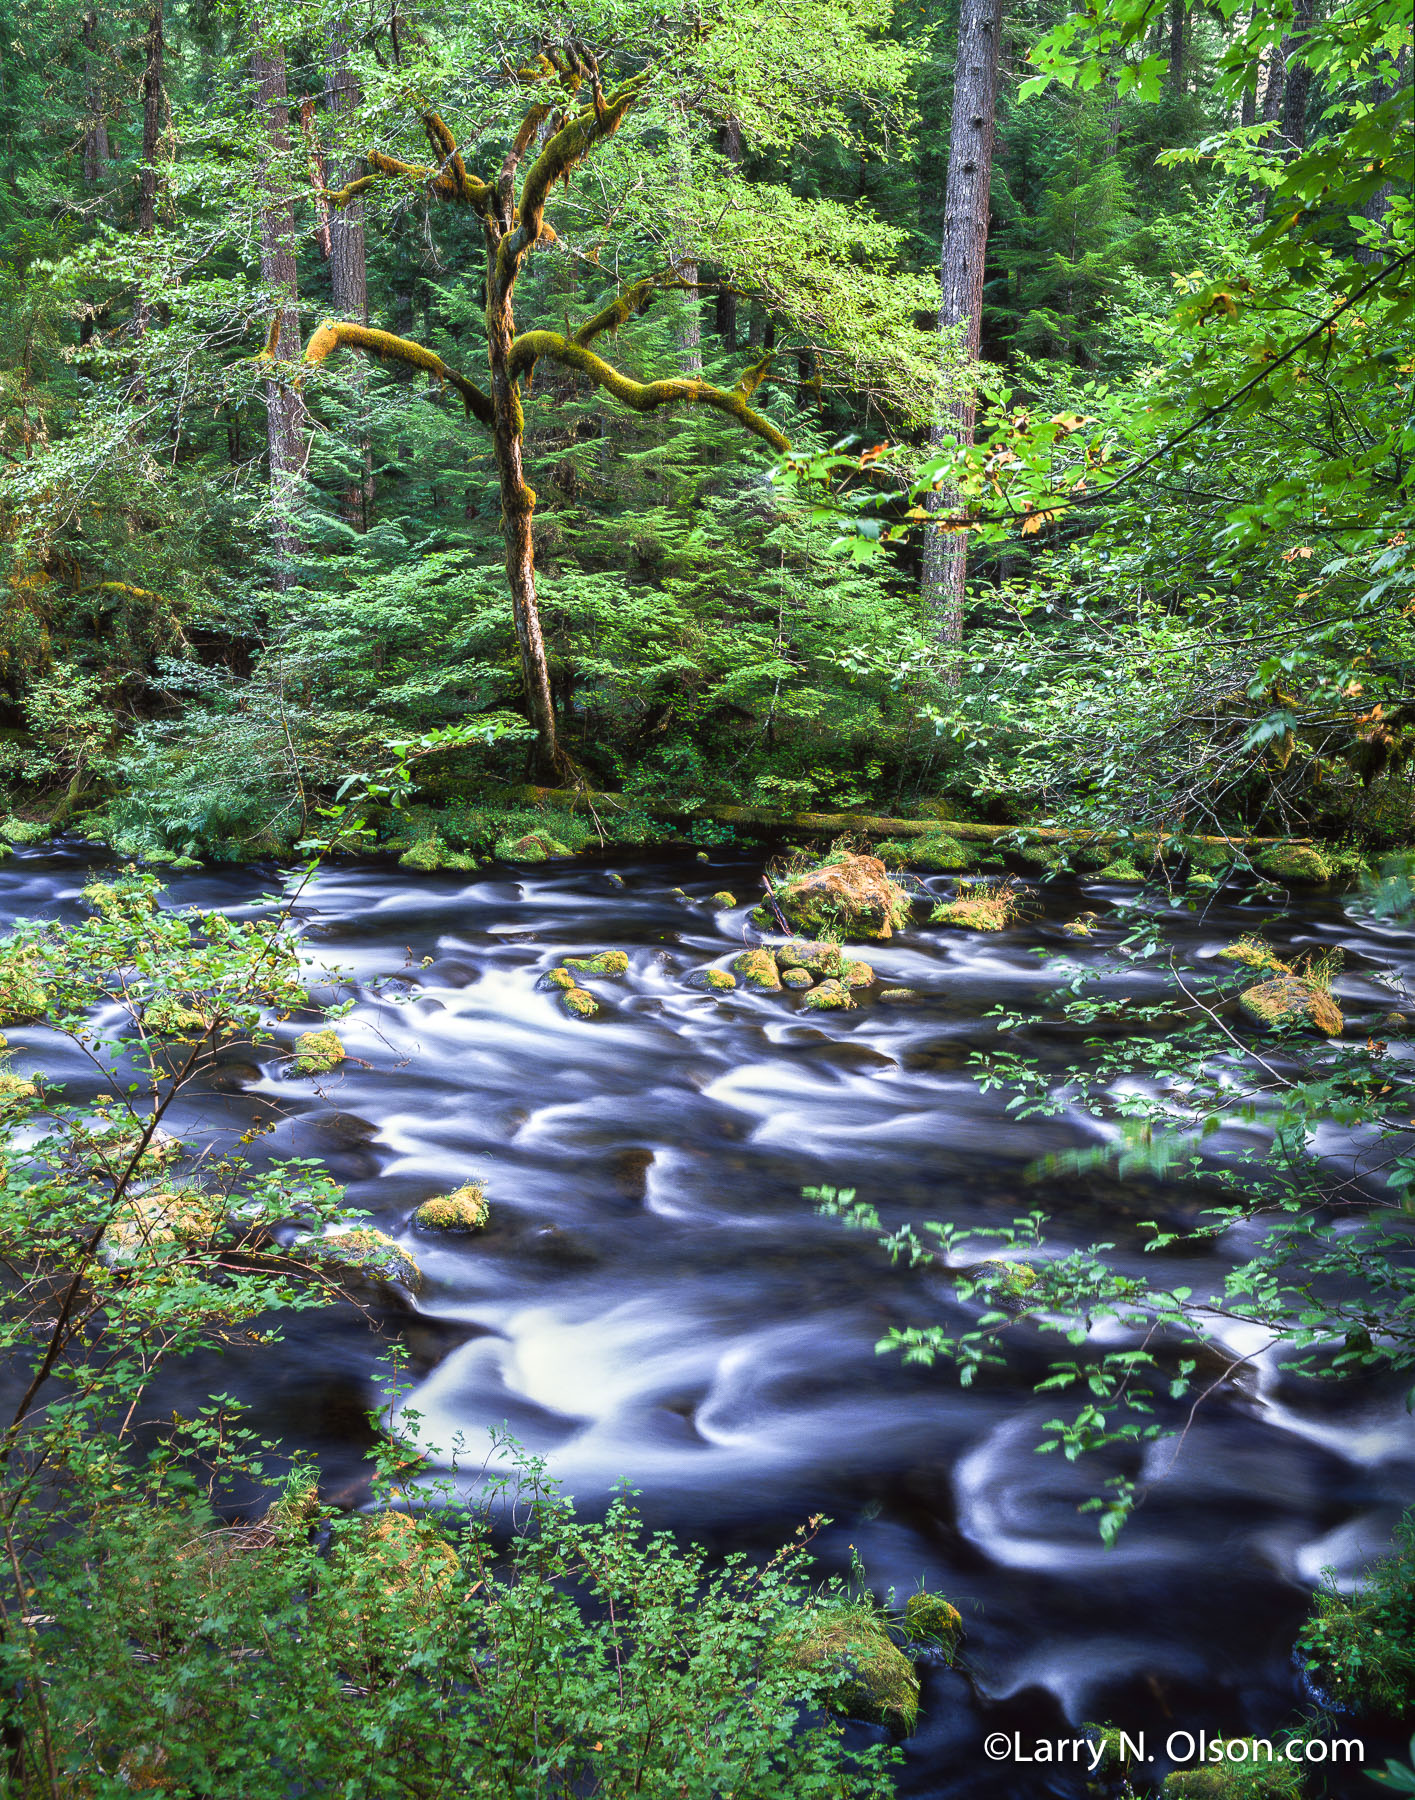 Talmolitch Valley, McKenzie River, OR | A long exposure of the film shows the motion of rapids.